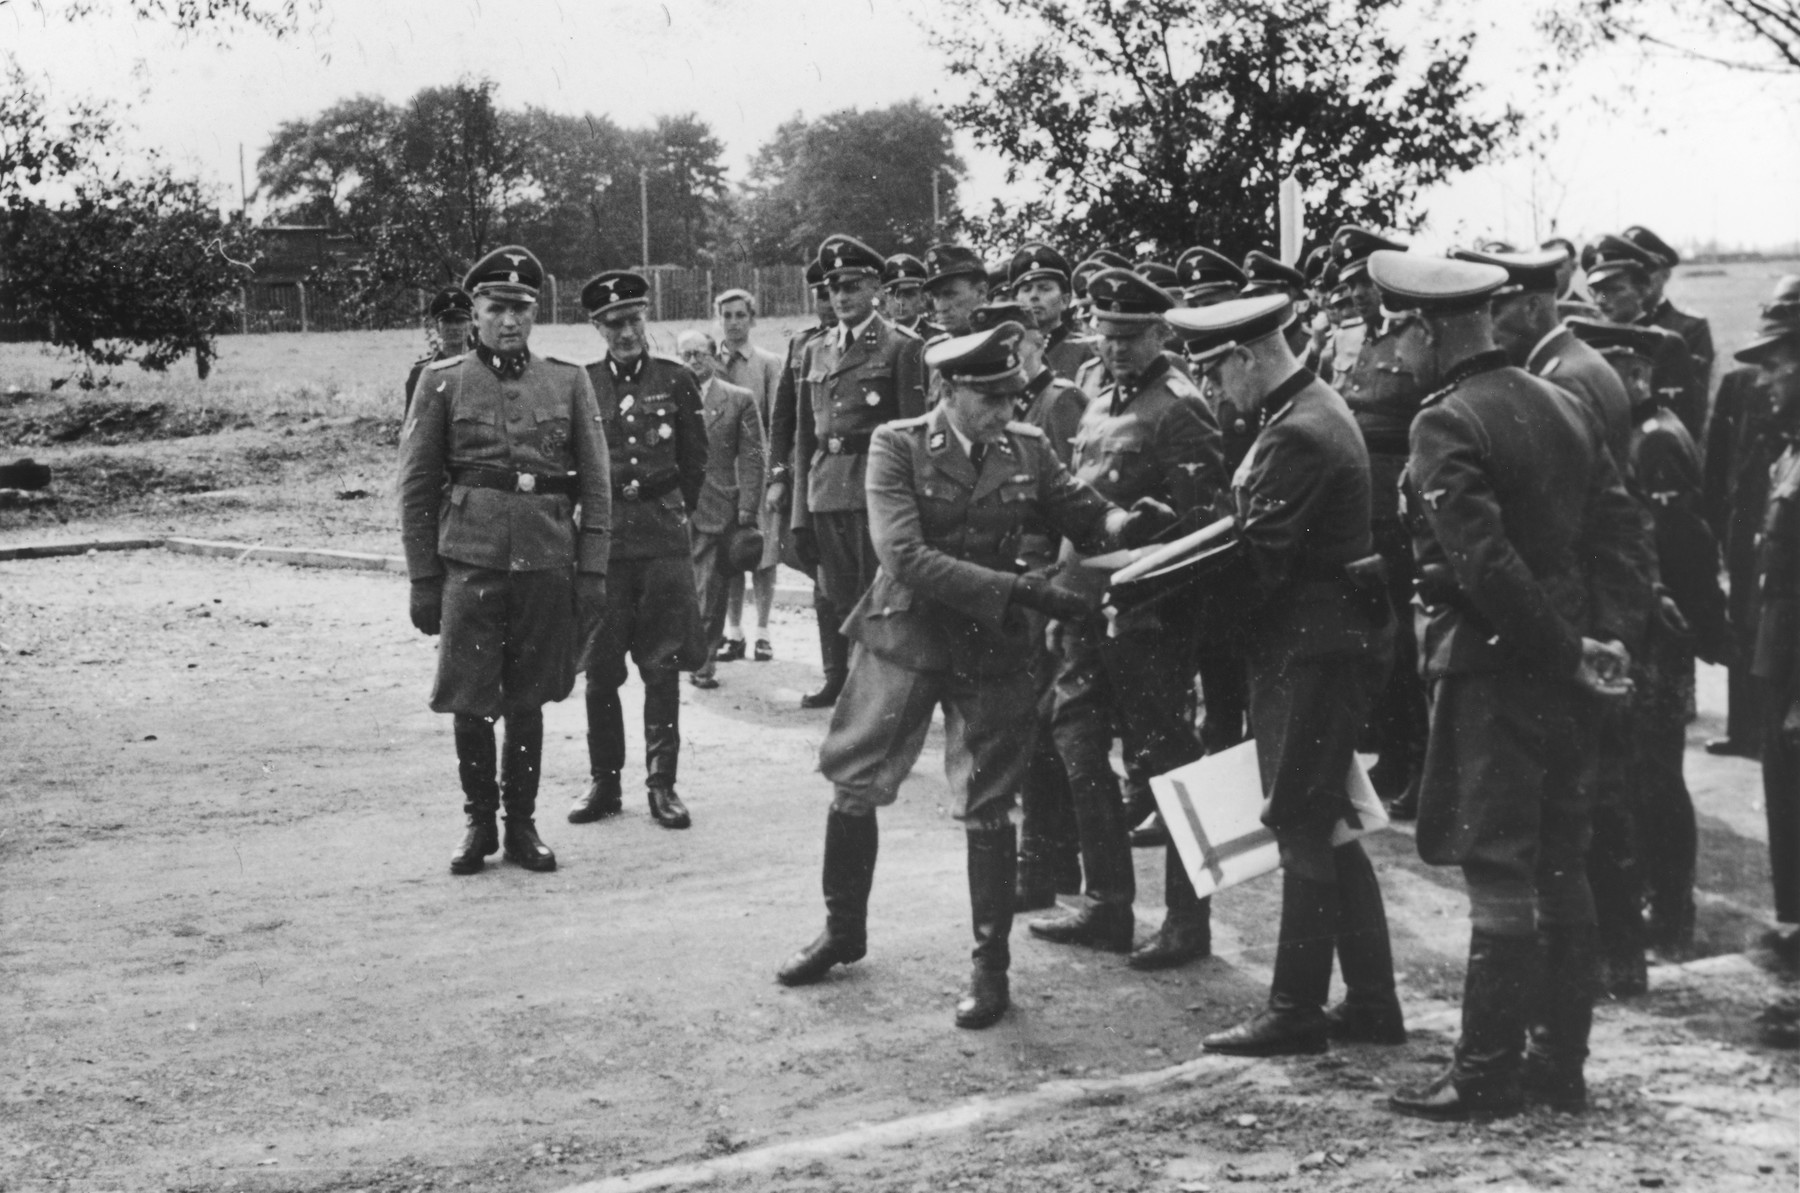 Nazi officers watch the presentation of a document during the dedication of the new SS hospital in Auschwitz.

The original caption reads "Die Ubergabe" (the handover).  The ceremony marks the transfer of documents and authority from the construction department to the camp upon completion of the project.

Commandant Richard Baer stands on the far left. Karl Bischoff, head of construction in Silesia, is receiving the official documents from (most probably Werner Jothann) in preparation for handing them to Baer.  Karl Moeckel is looking down at the exchange of documents.  Also pictured are Drs. Enno Lolling, Eduard Wirths and Carl Clauberg.  Heinz Baumkoetter is in the back looking up slightly.